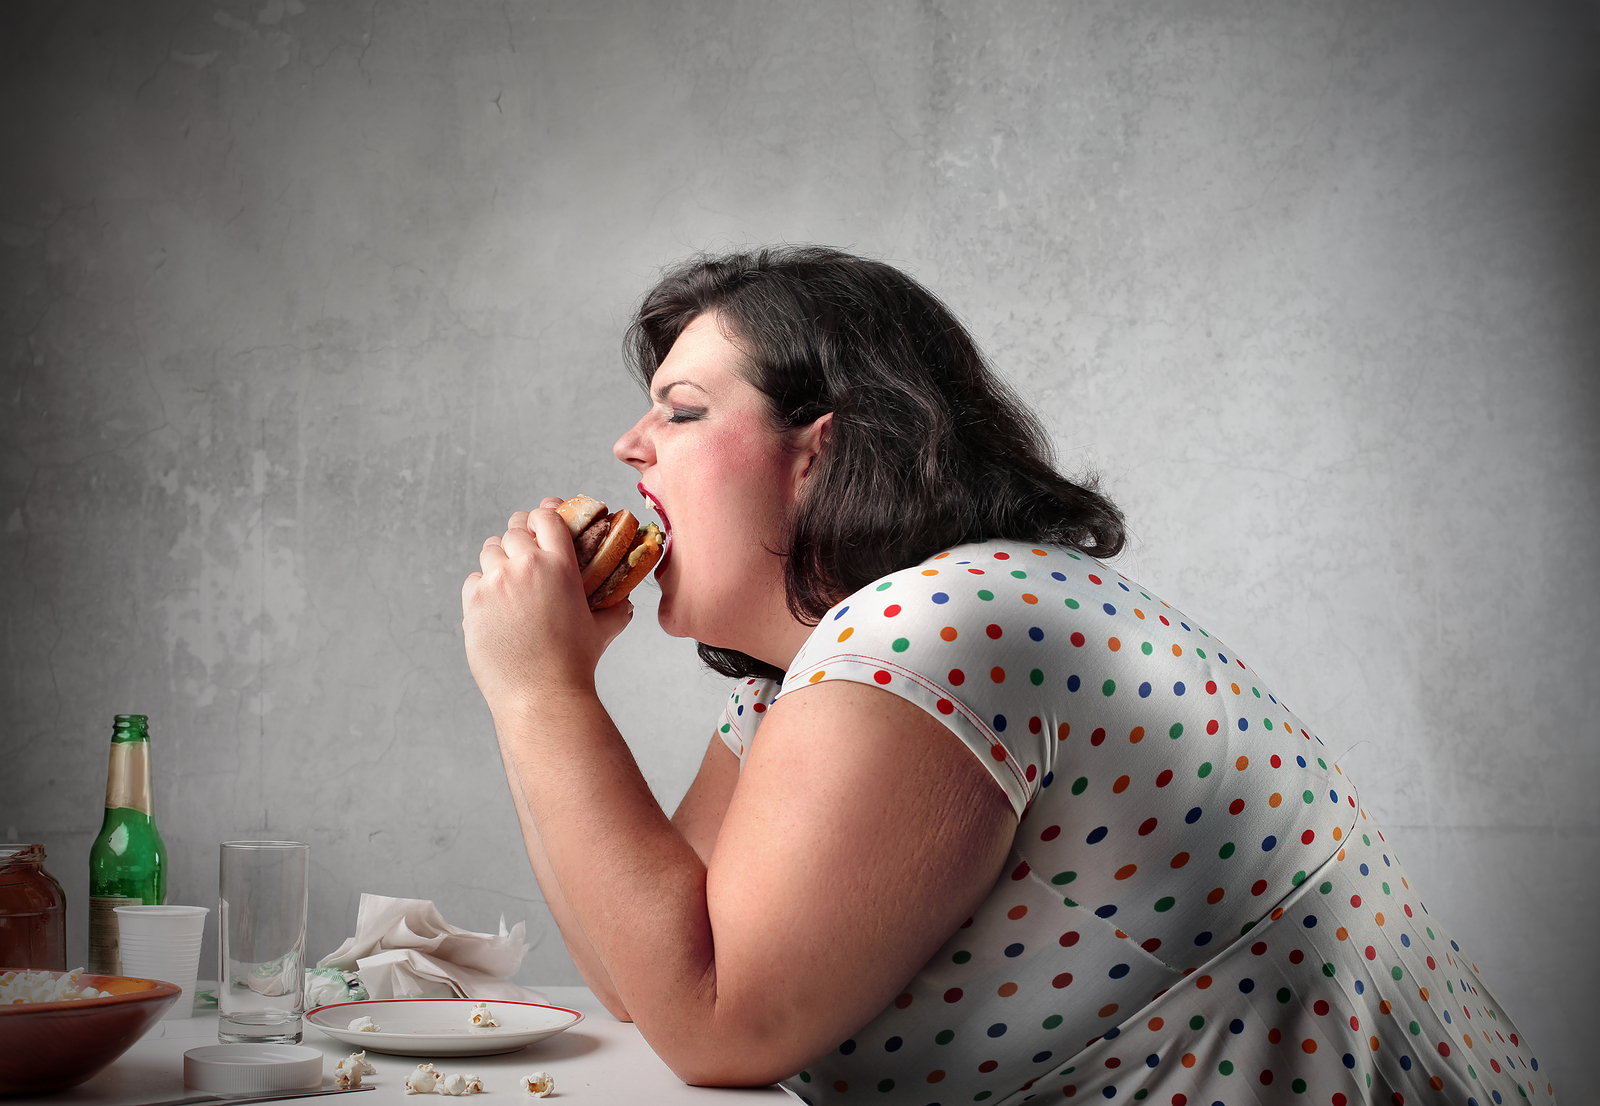 How Much Weight Is Too Much The Truth about Fat Acceptance